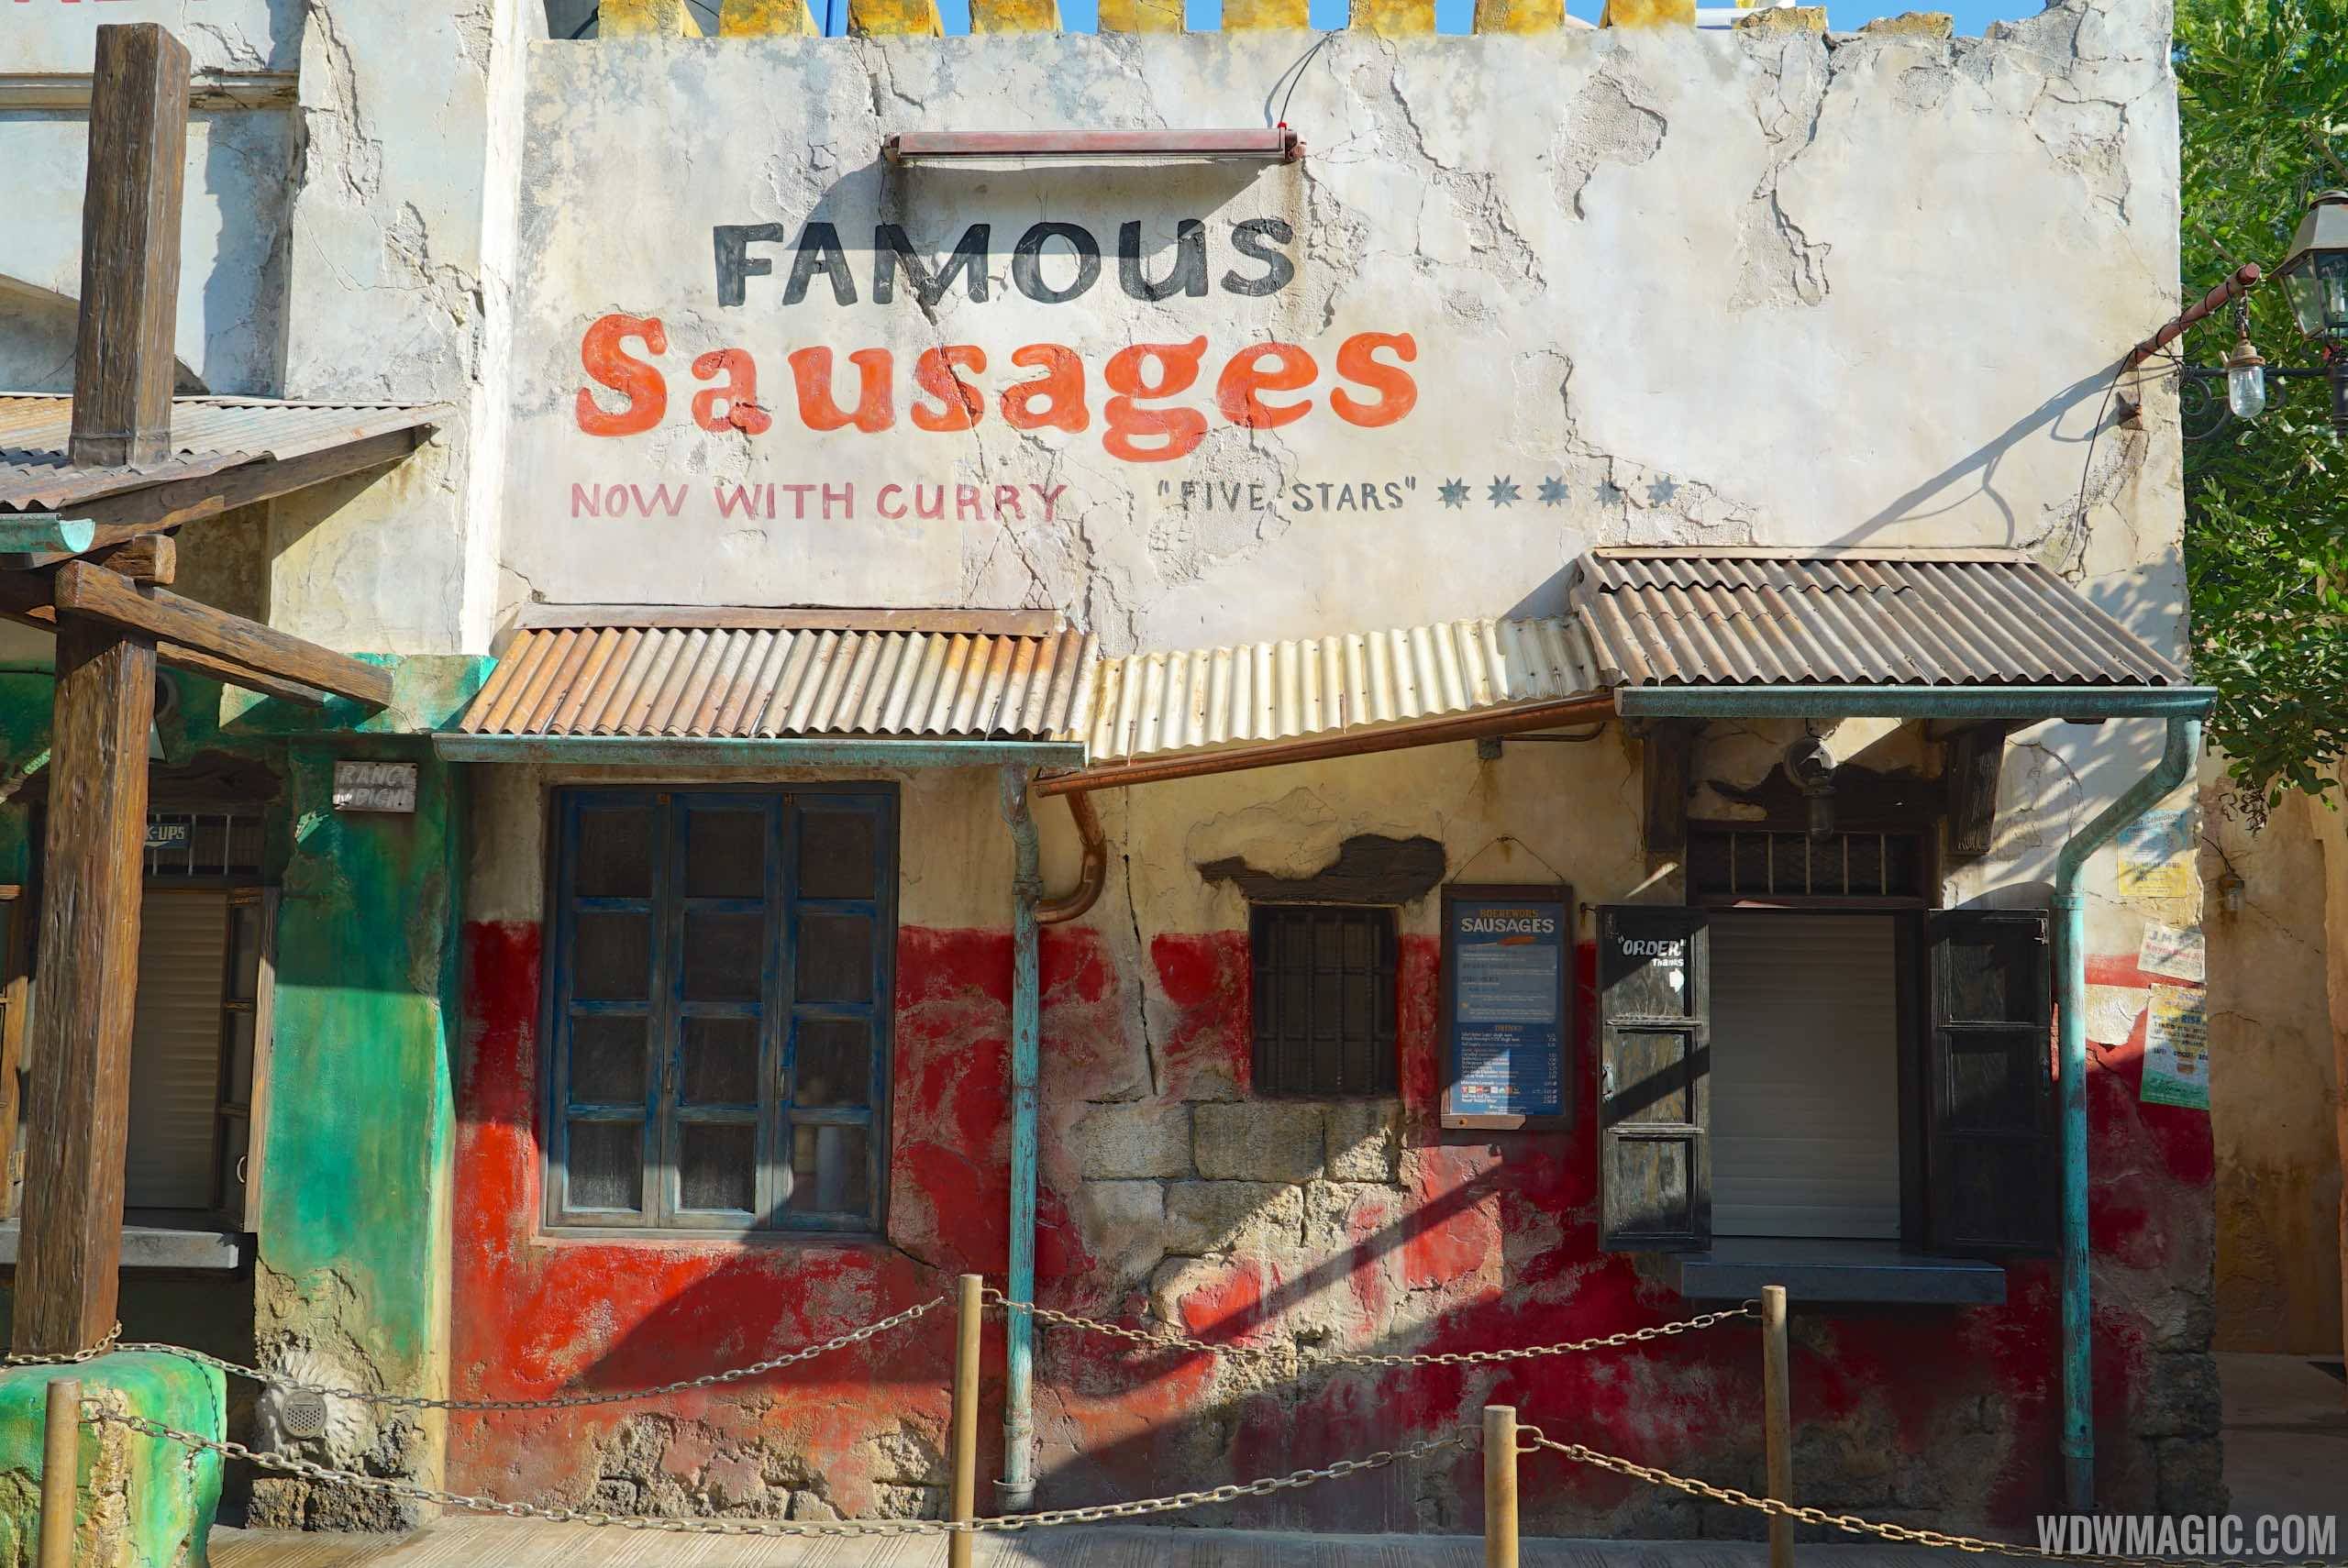 Harambe Market - Famous Sausages